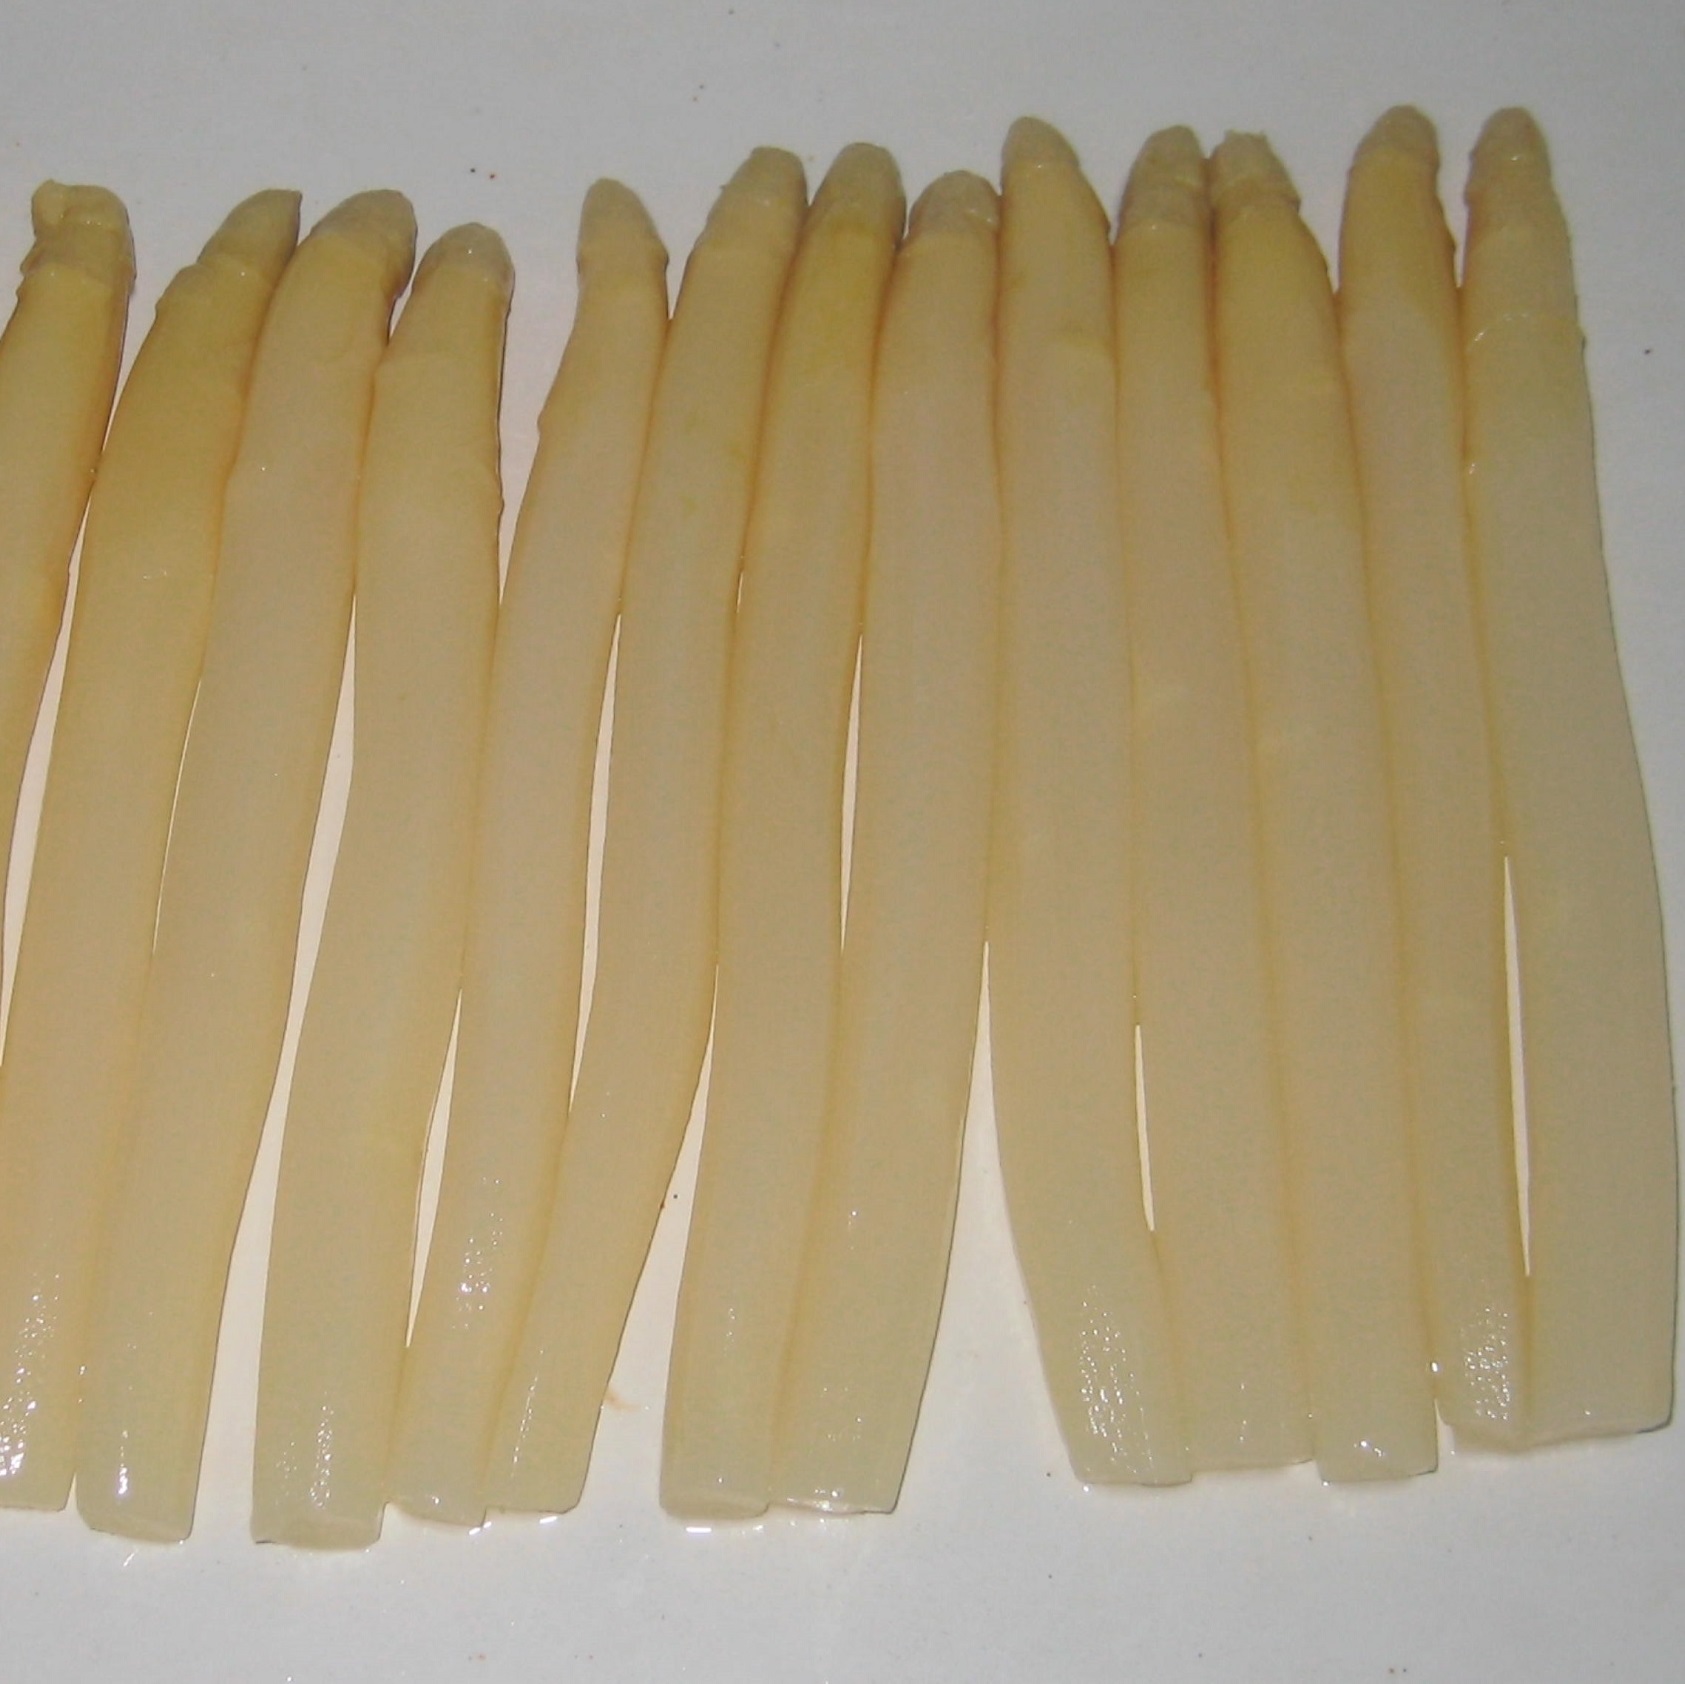 canned white asparagus